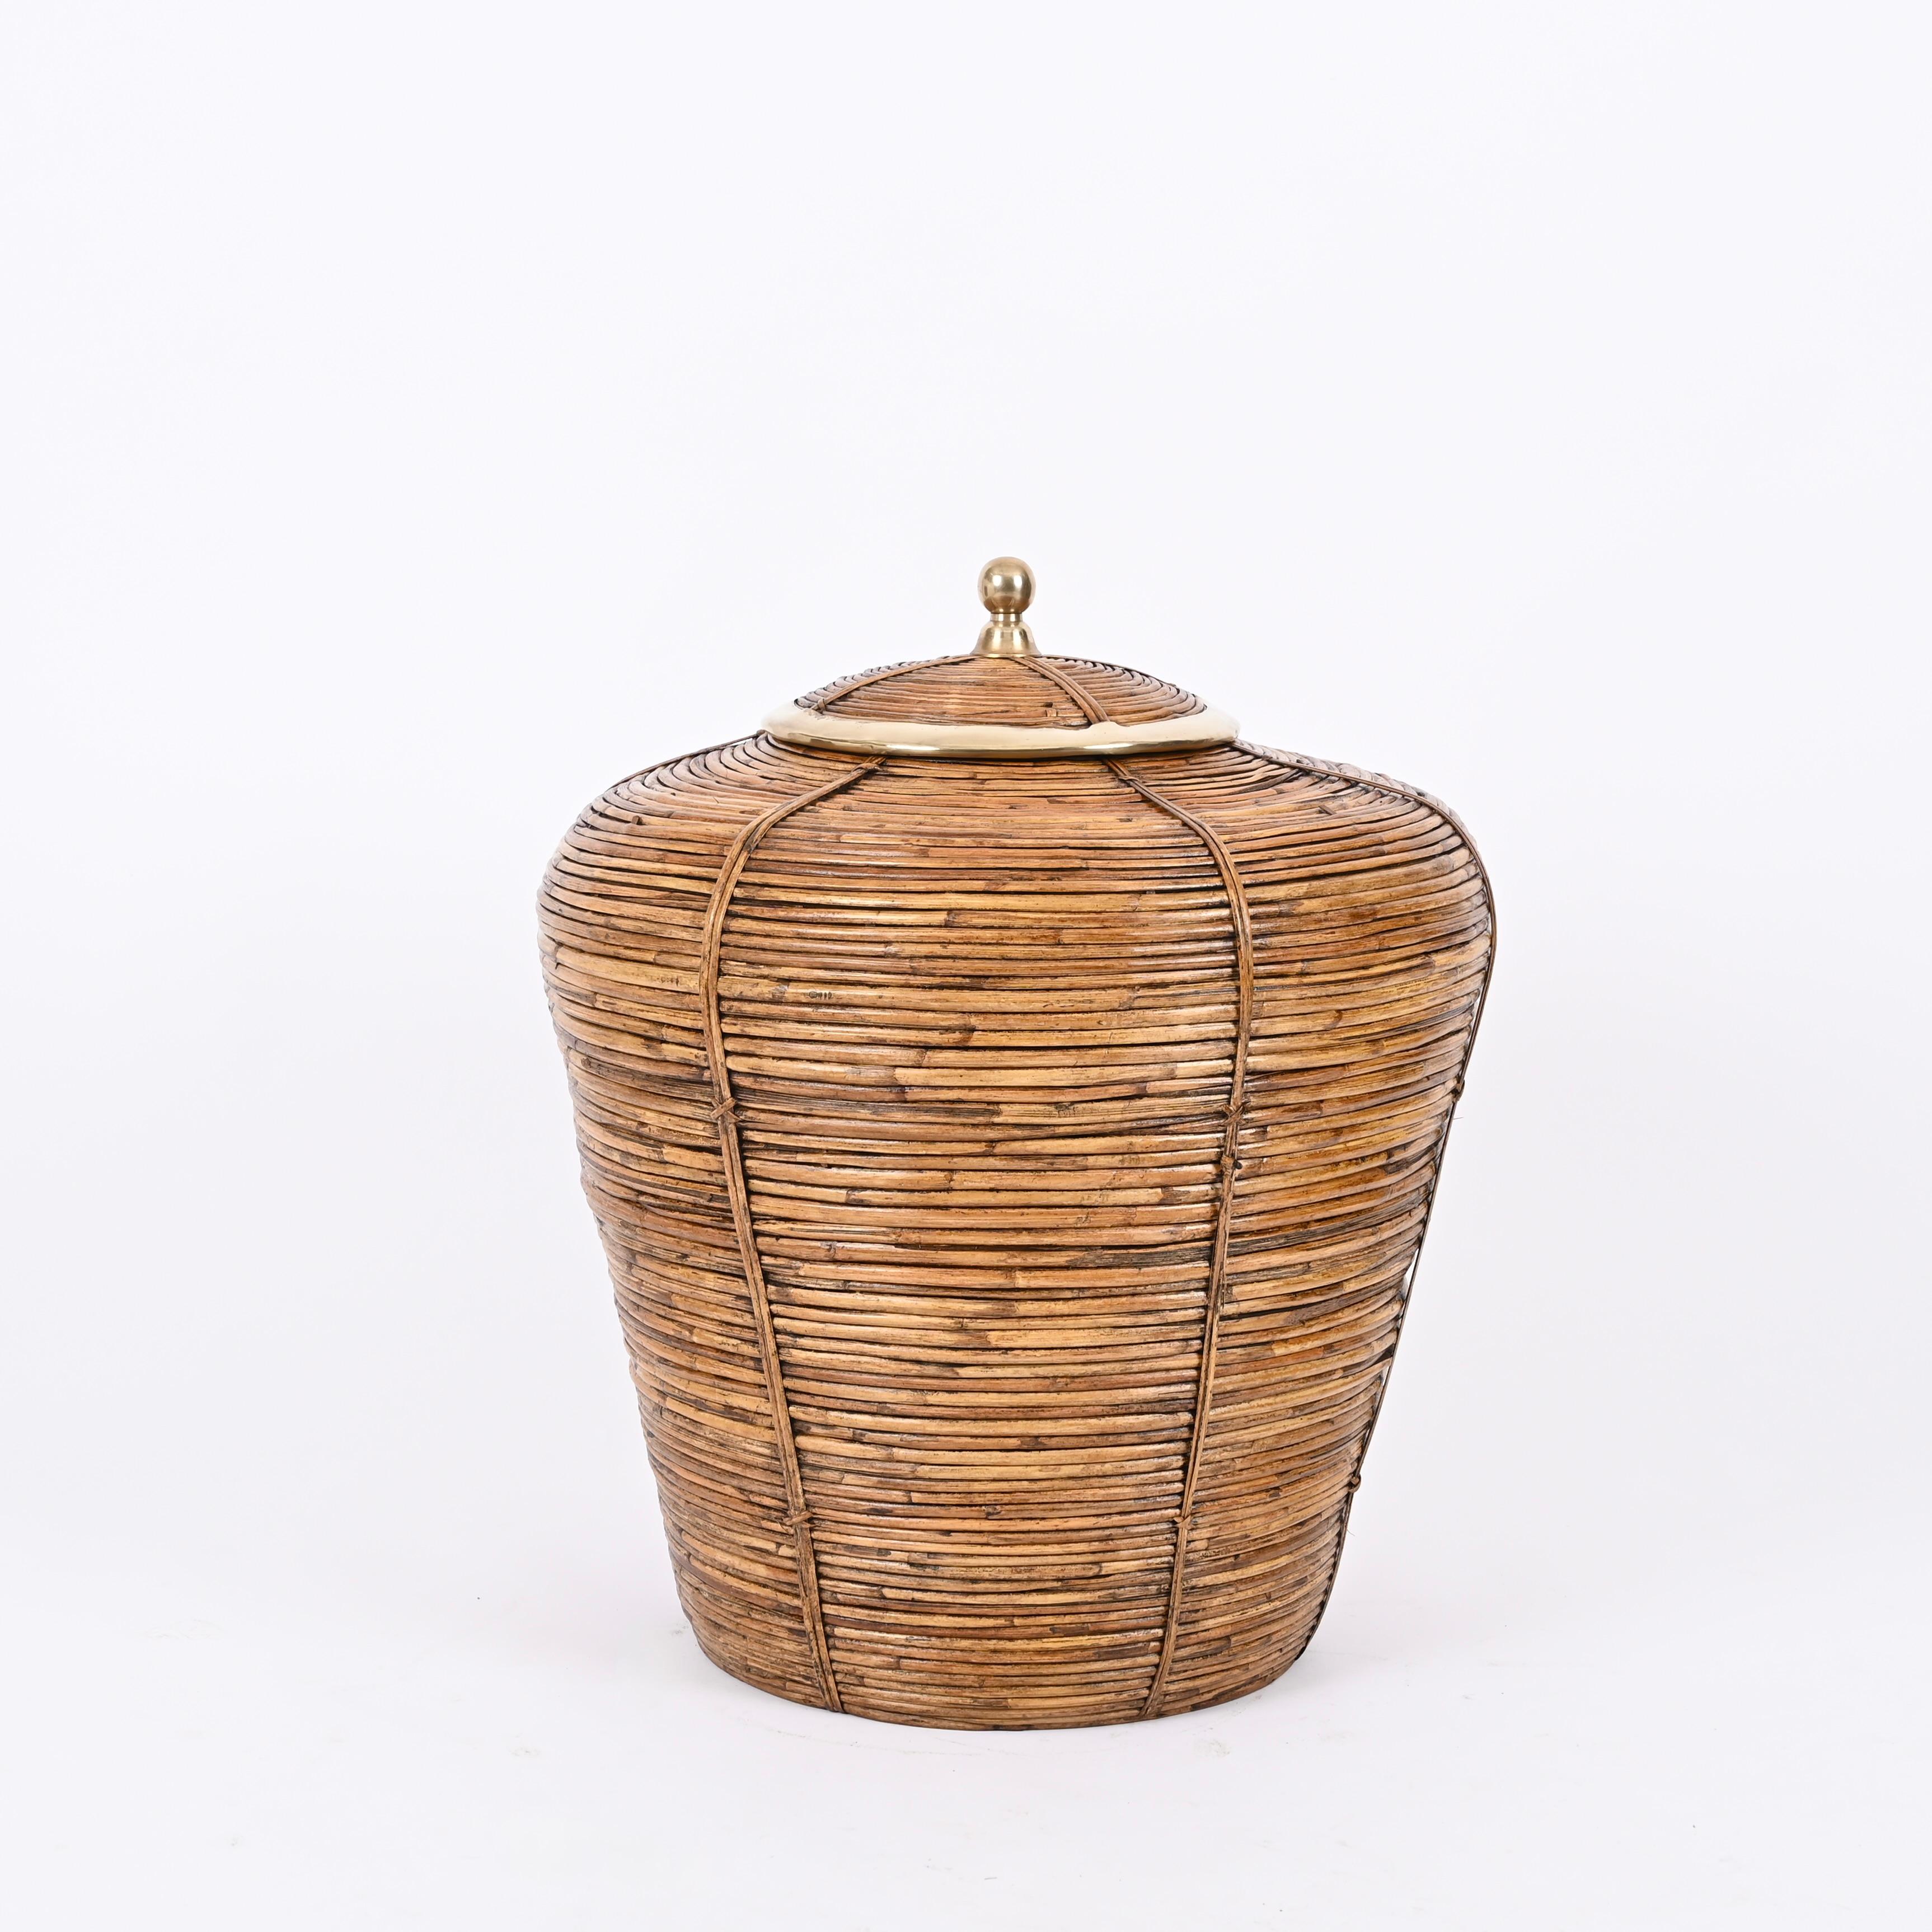 20th Century French Riviera Huge Basket in Rattan, Brass, Gabriella Crespi Style Italy 1970s For Sale